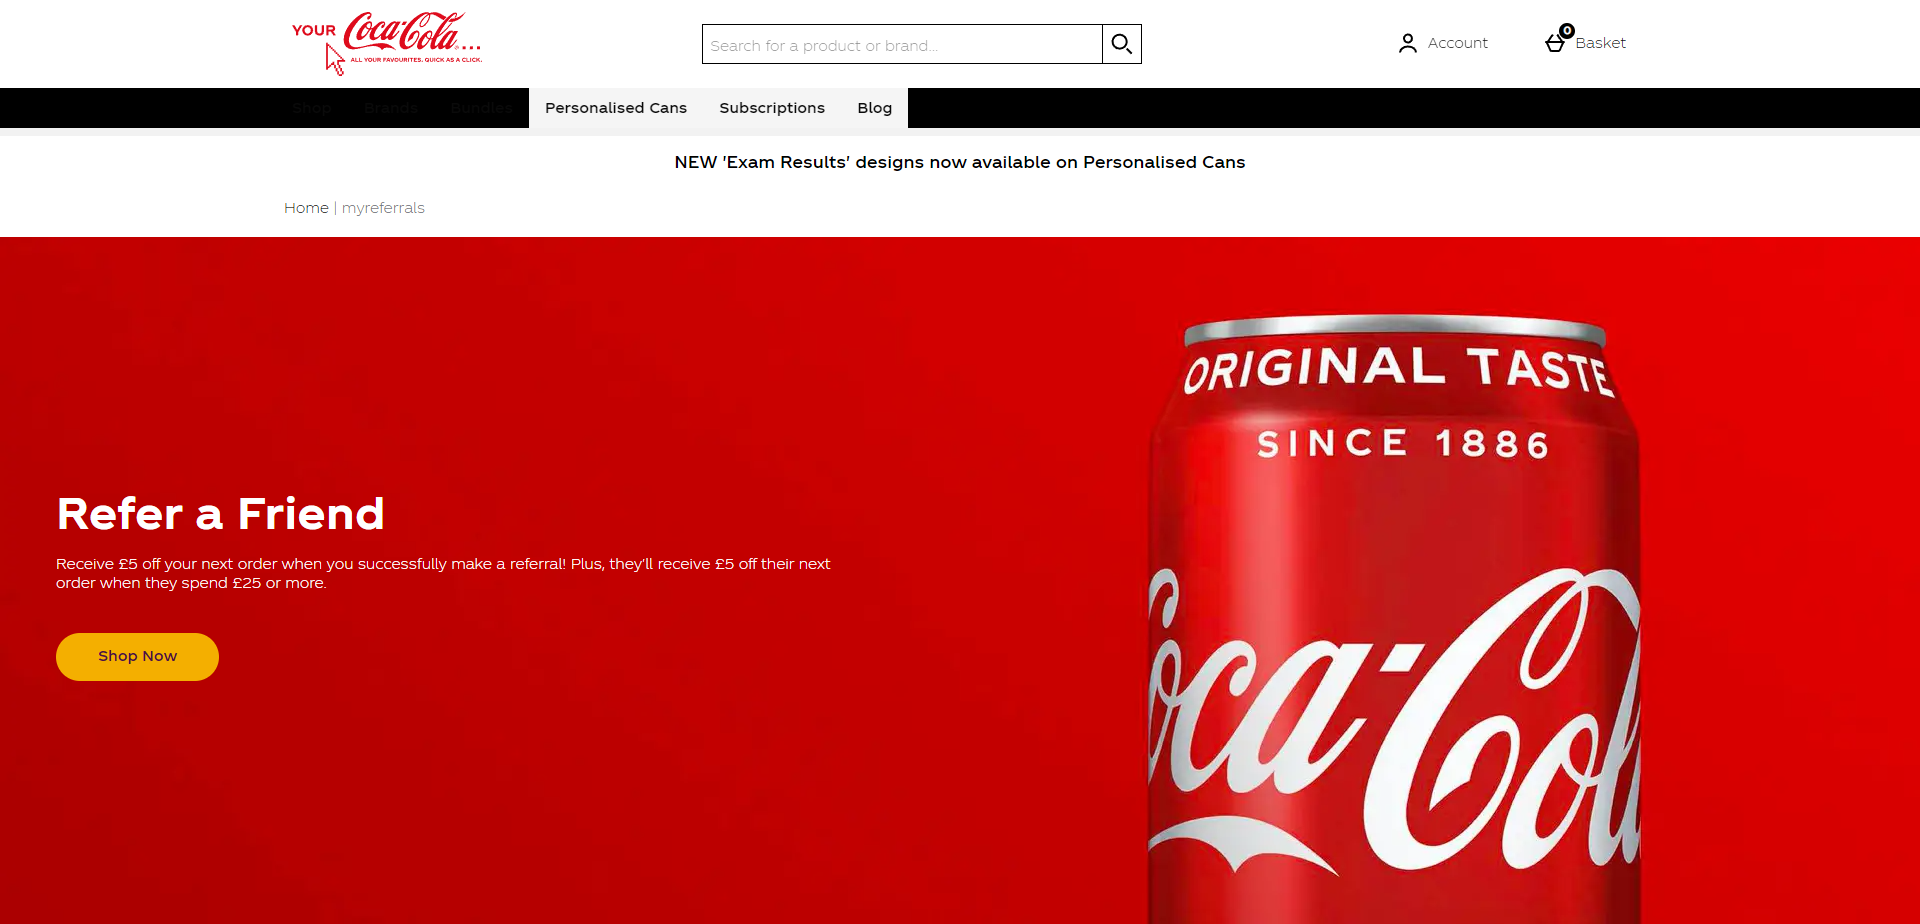 Referral Landing Page for Your Coca-Cola